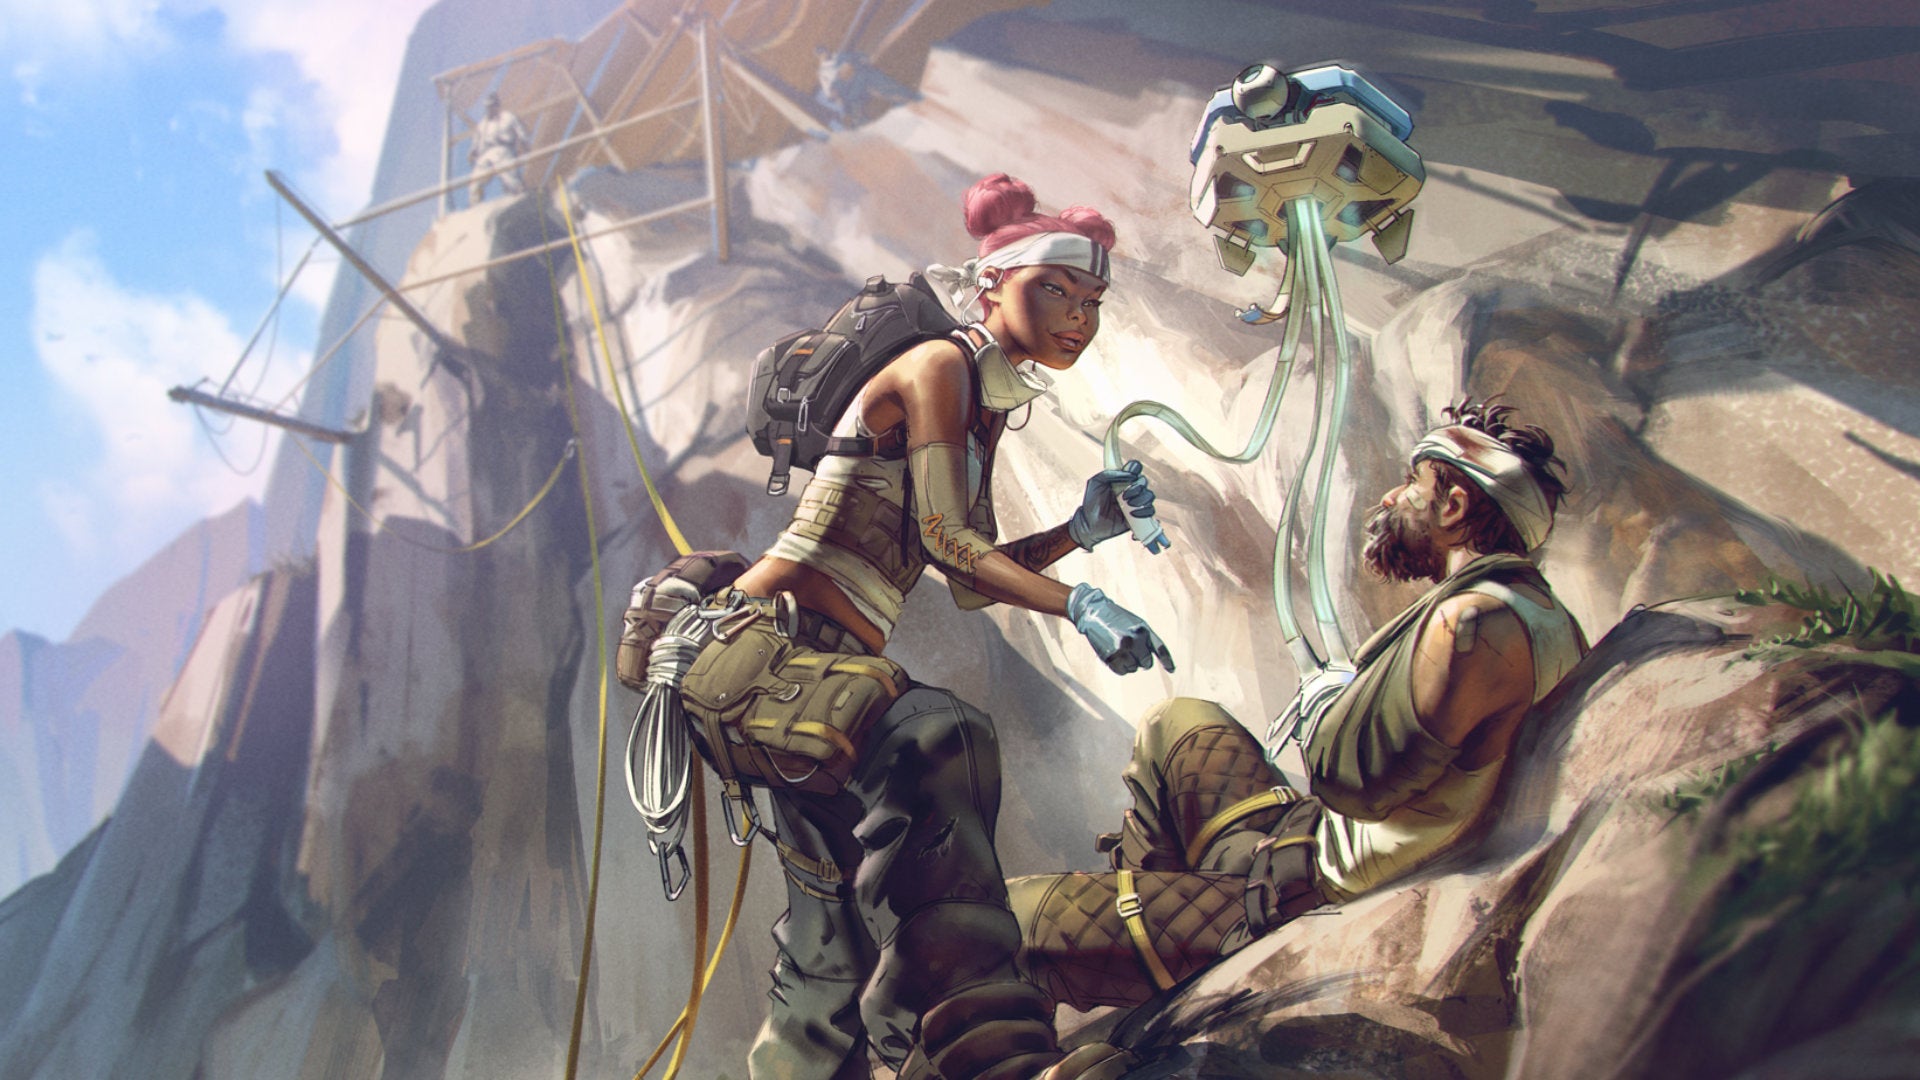 Some Apex Legends concept art of Lifeline using her Drone to heal a wounded ally.